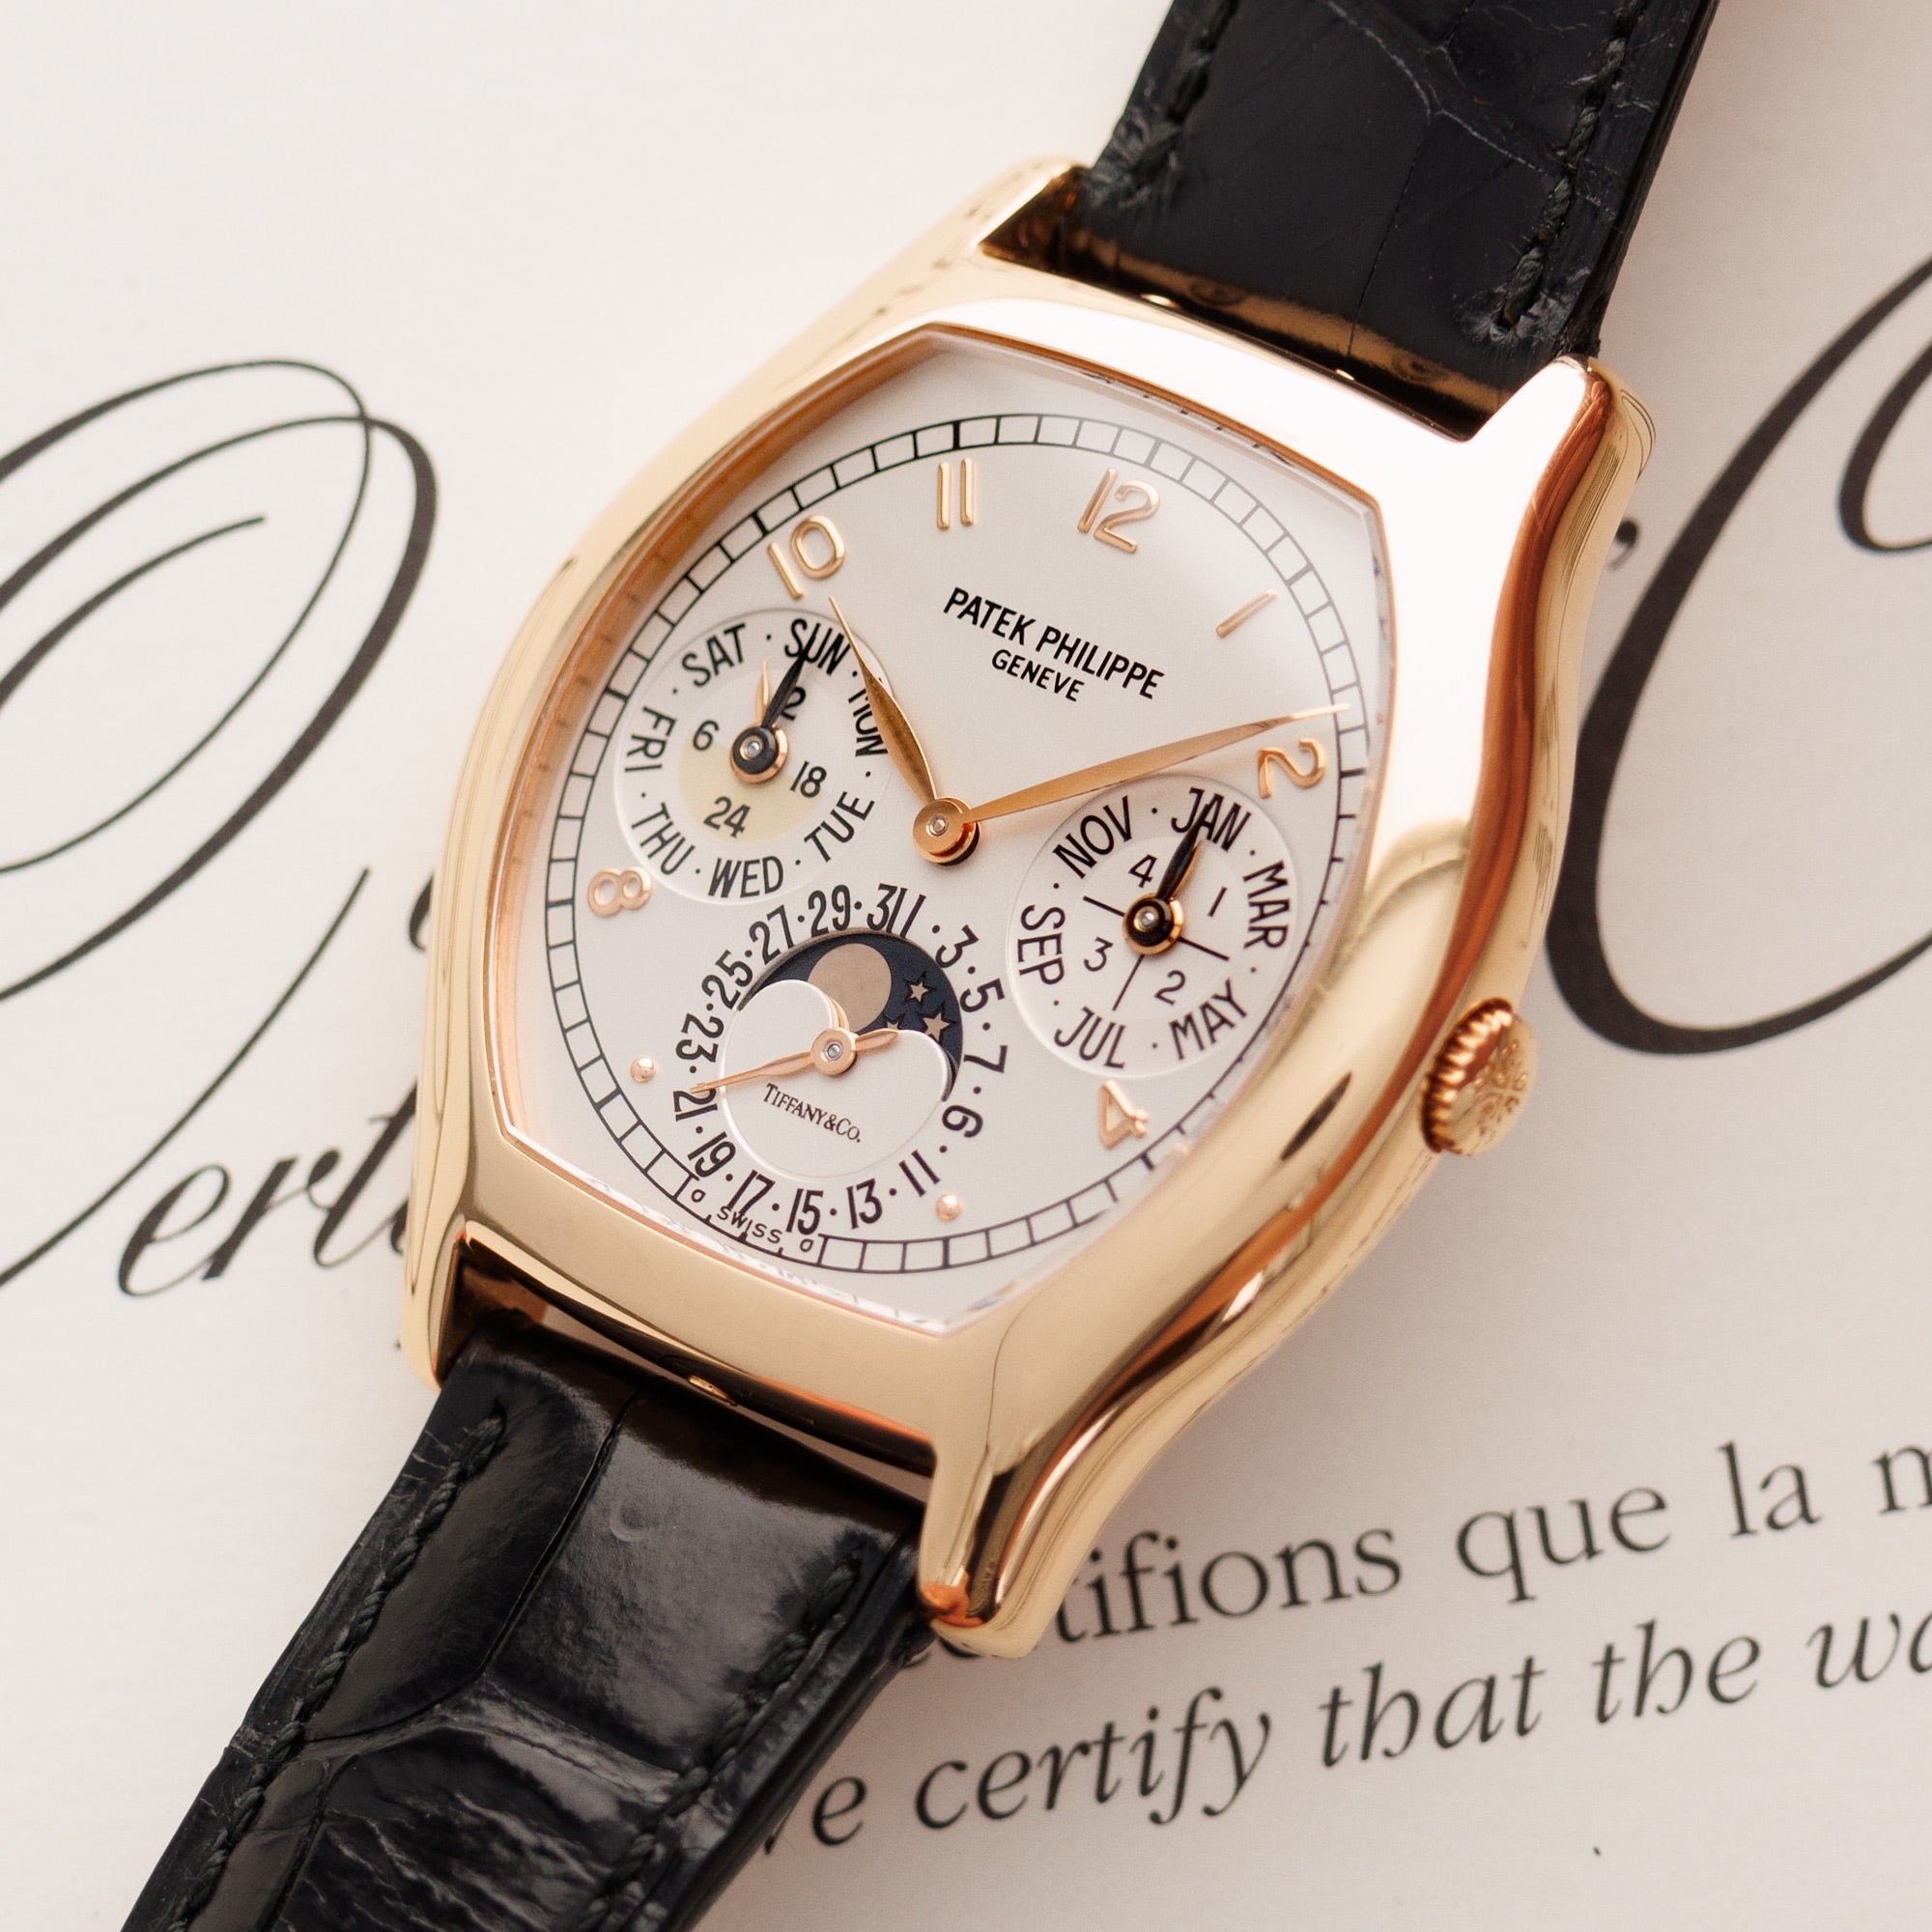 Patek Philippe - Patek Philippe Rose Gold Perpetual Calendar Ref. 5040 retailed by Tiffany & Co. - The Keystone Watches